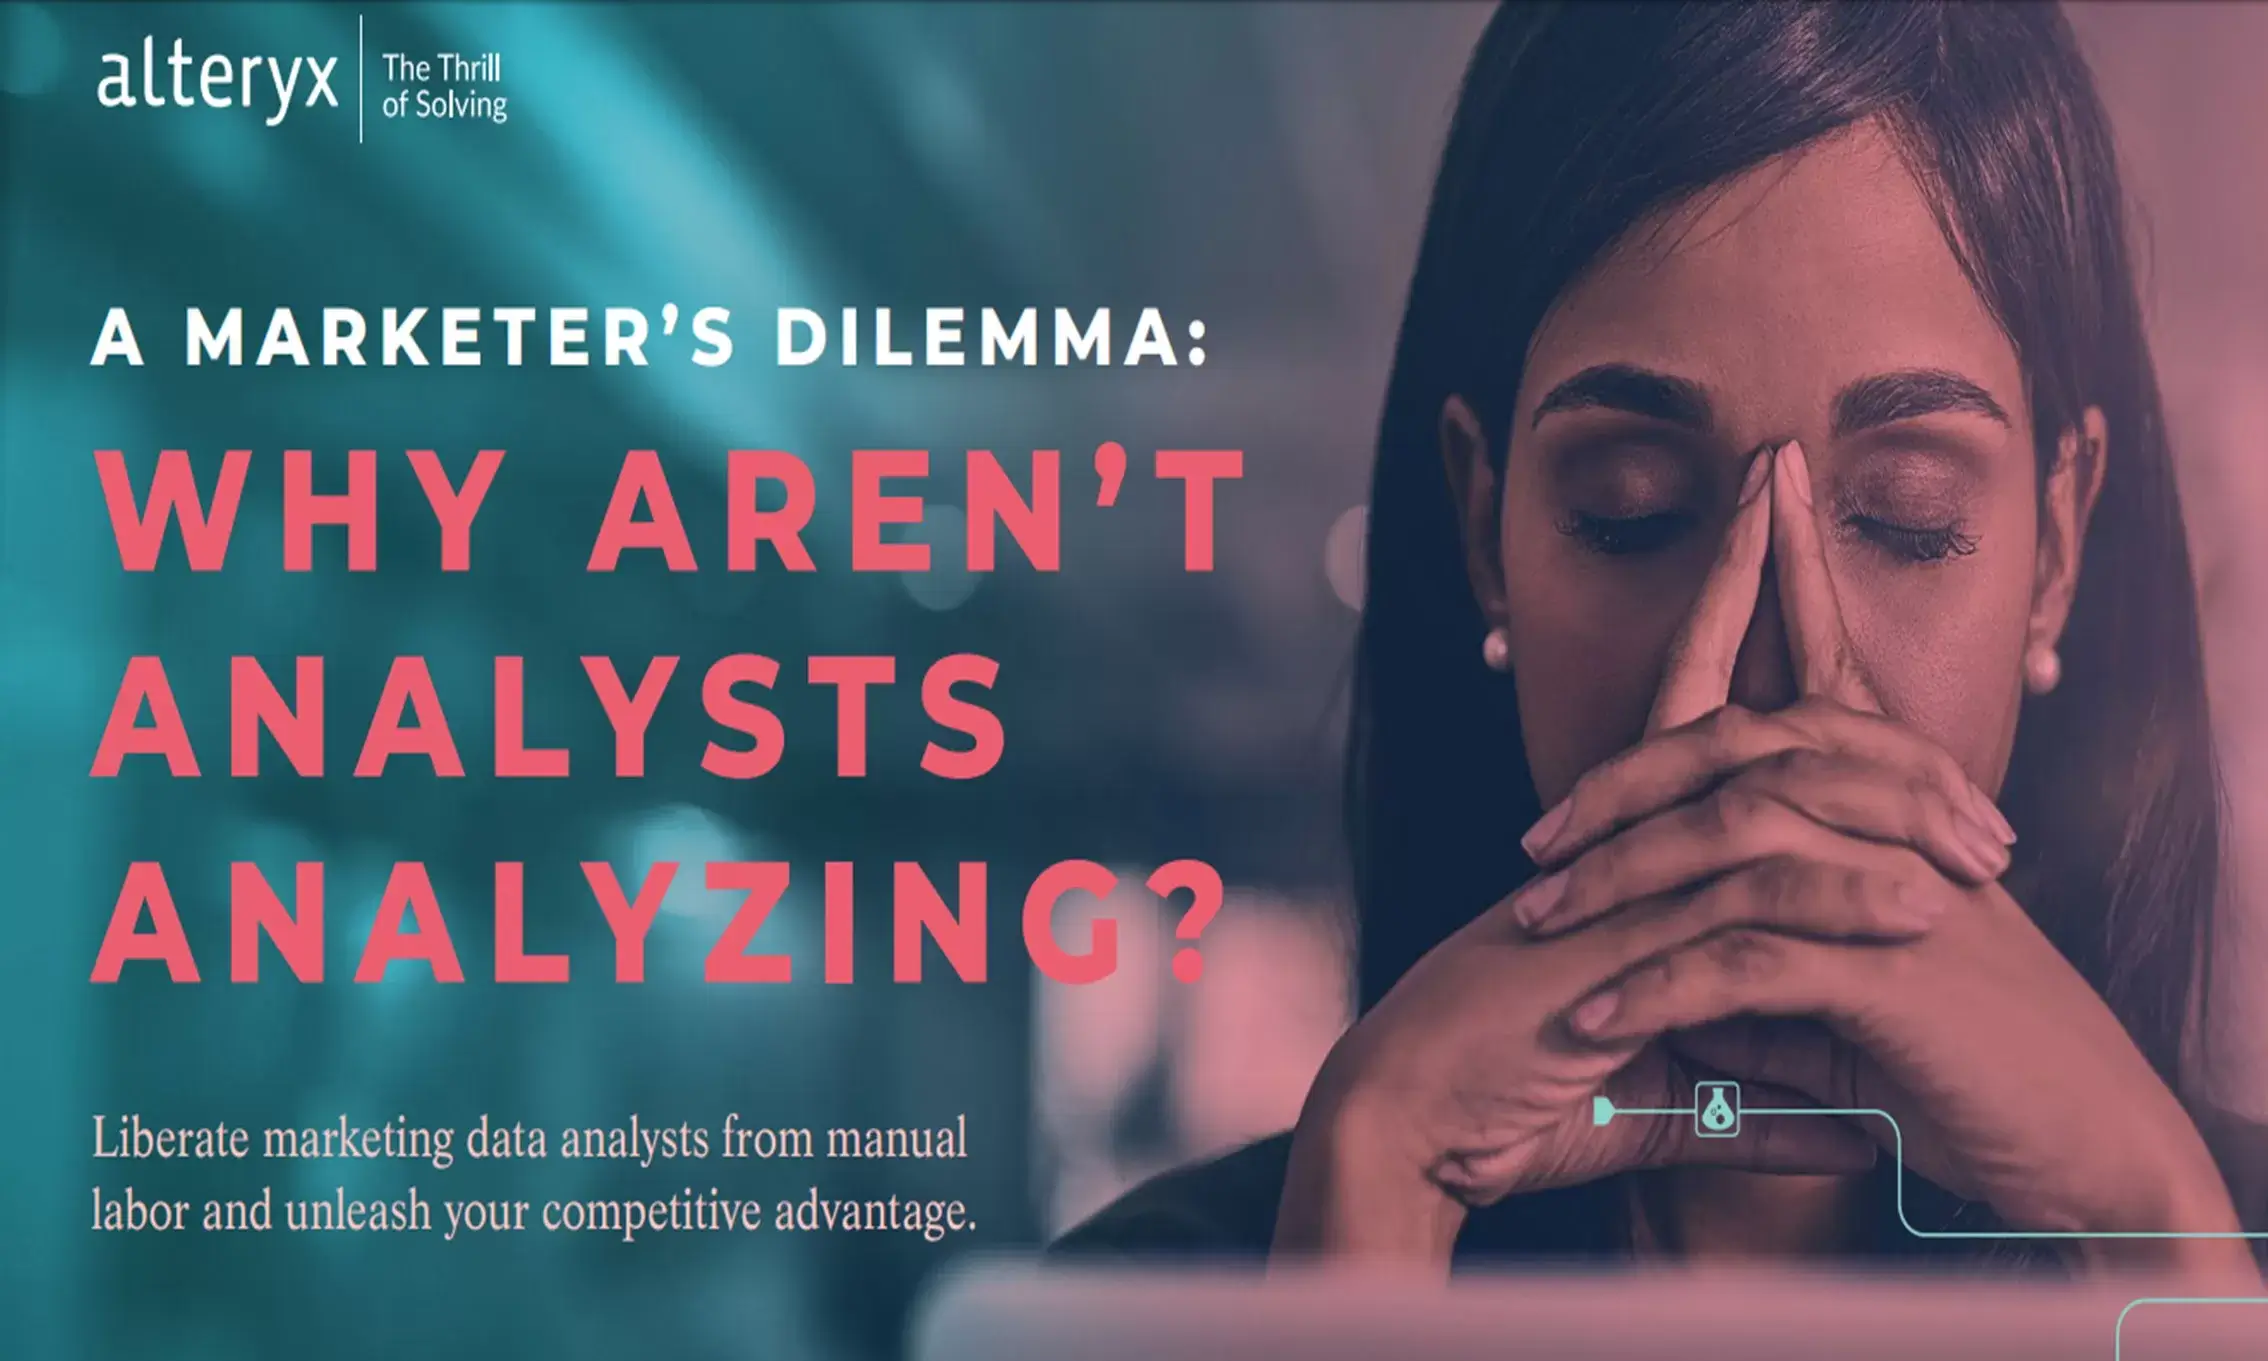 A Marketer’s Dilemma: Why Aren’t Analysts Analyzing?